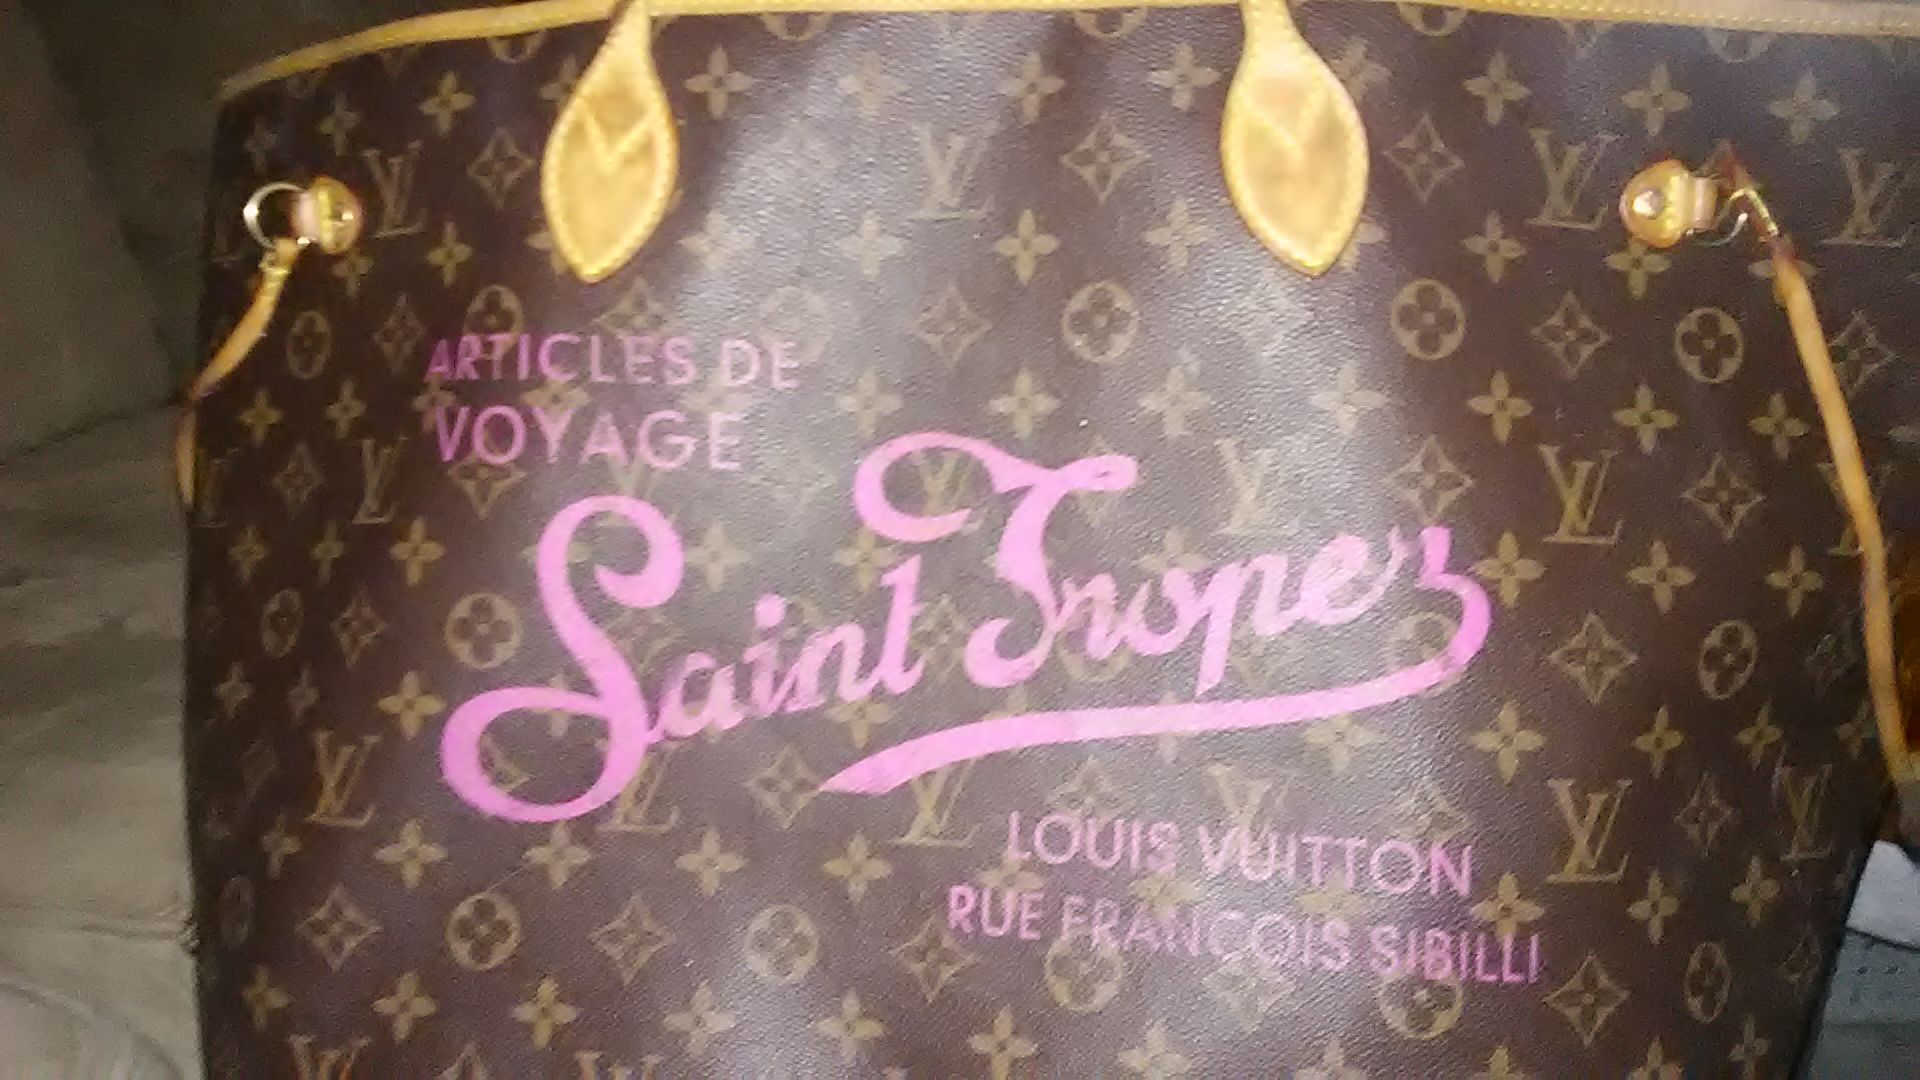 New in Box Louis Vuitton St Tropez On The Go Limited Edition Bag